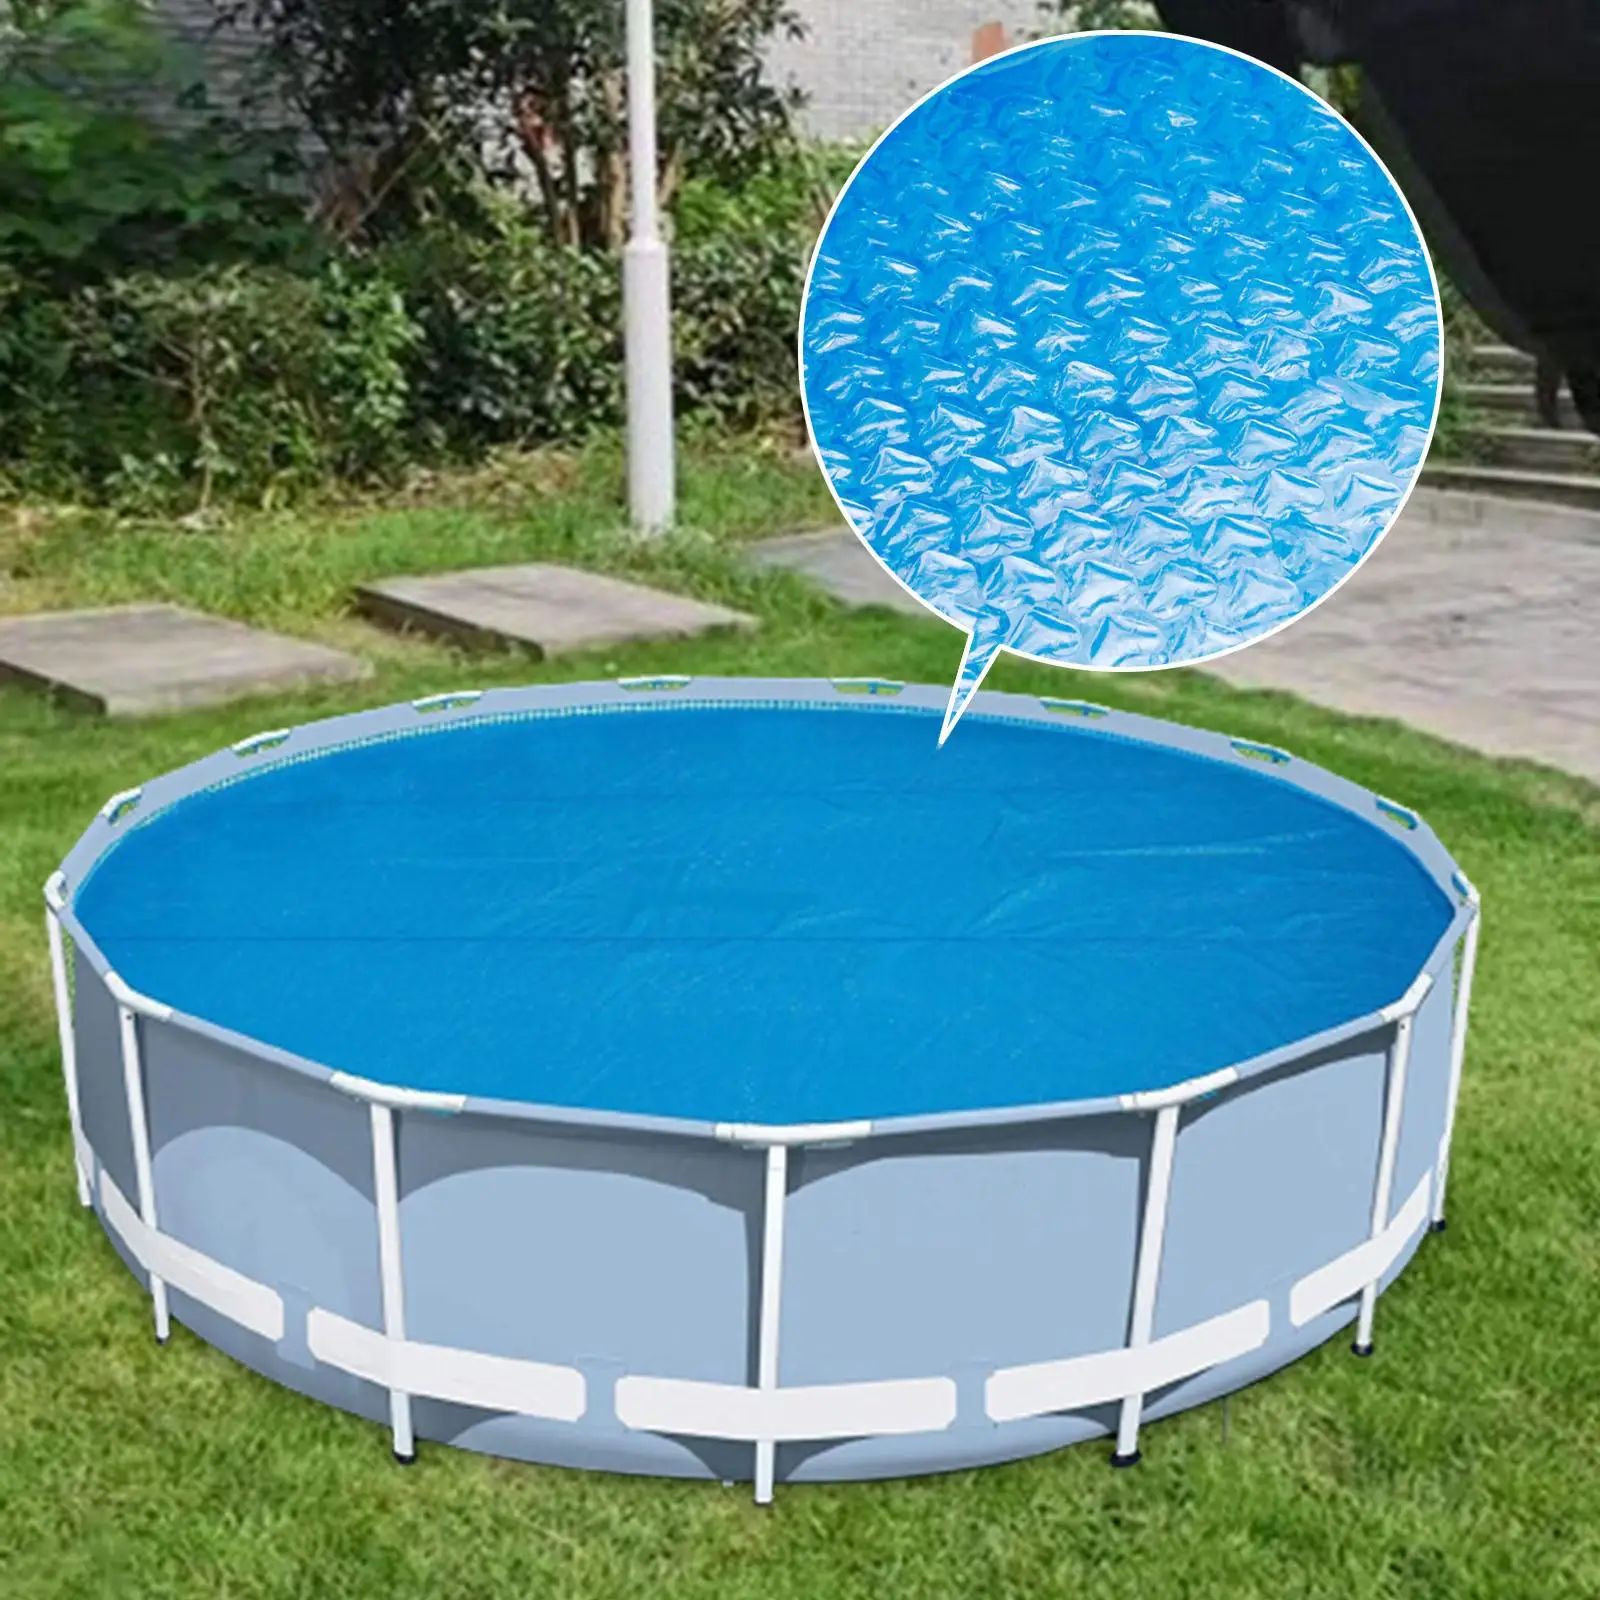 Swimming Pool Mat Round Pool Accessories Waterproof Durability Inflatable cover for Paddling Indoor Pool Inflatable Pool